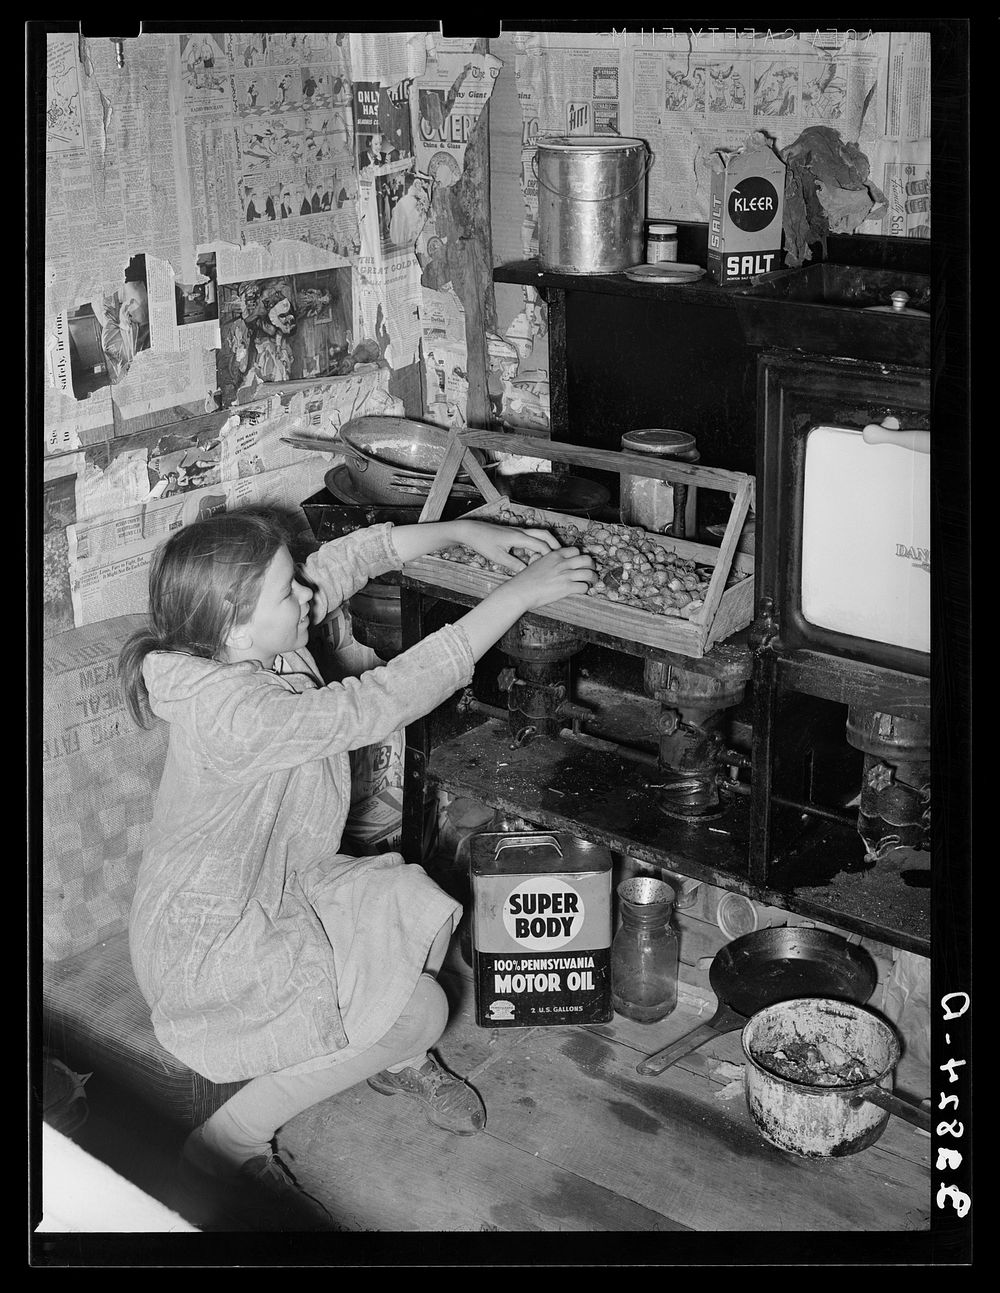 Kitchen in house provided for migratory berry picker near Ponchatoula, Louisiana by Russell Lee